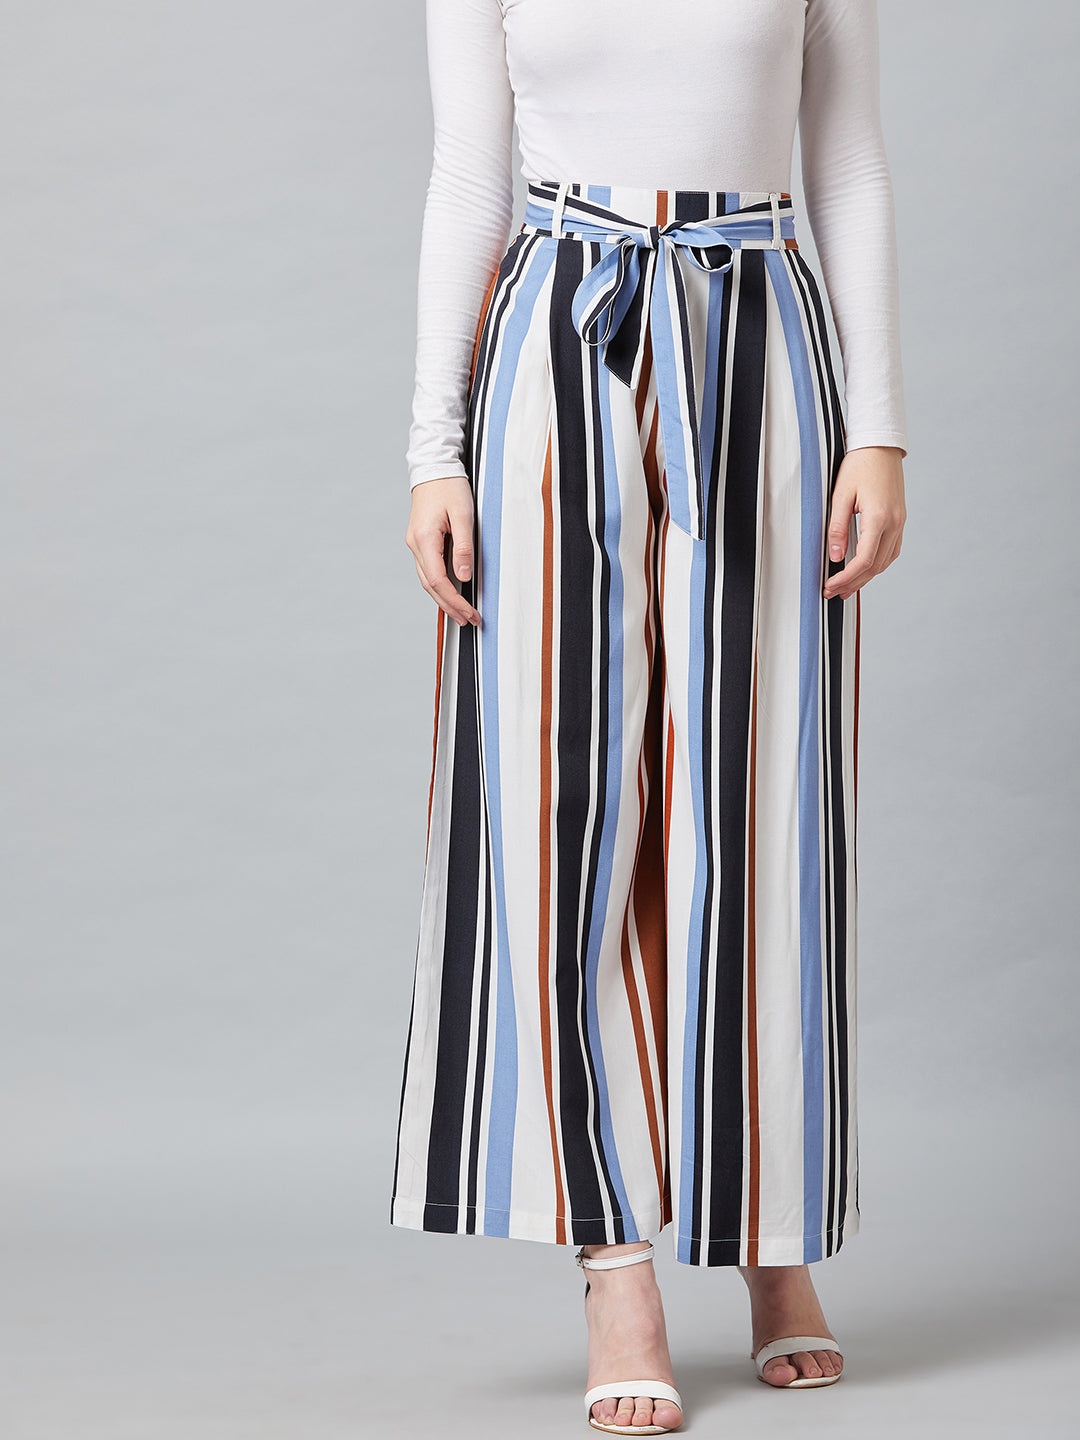 Wide-leg Pants - Black/white striped - Ladies | H&M US 1 | Fashion outfits,  Classy going out outfits, Outfits